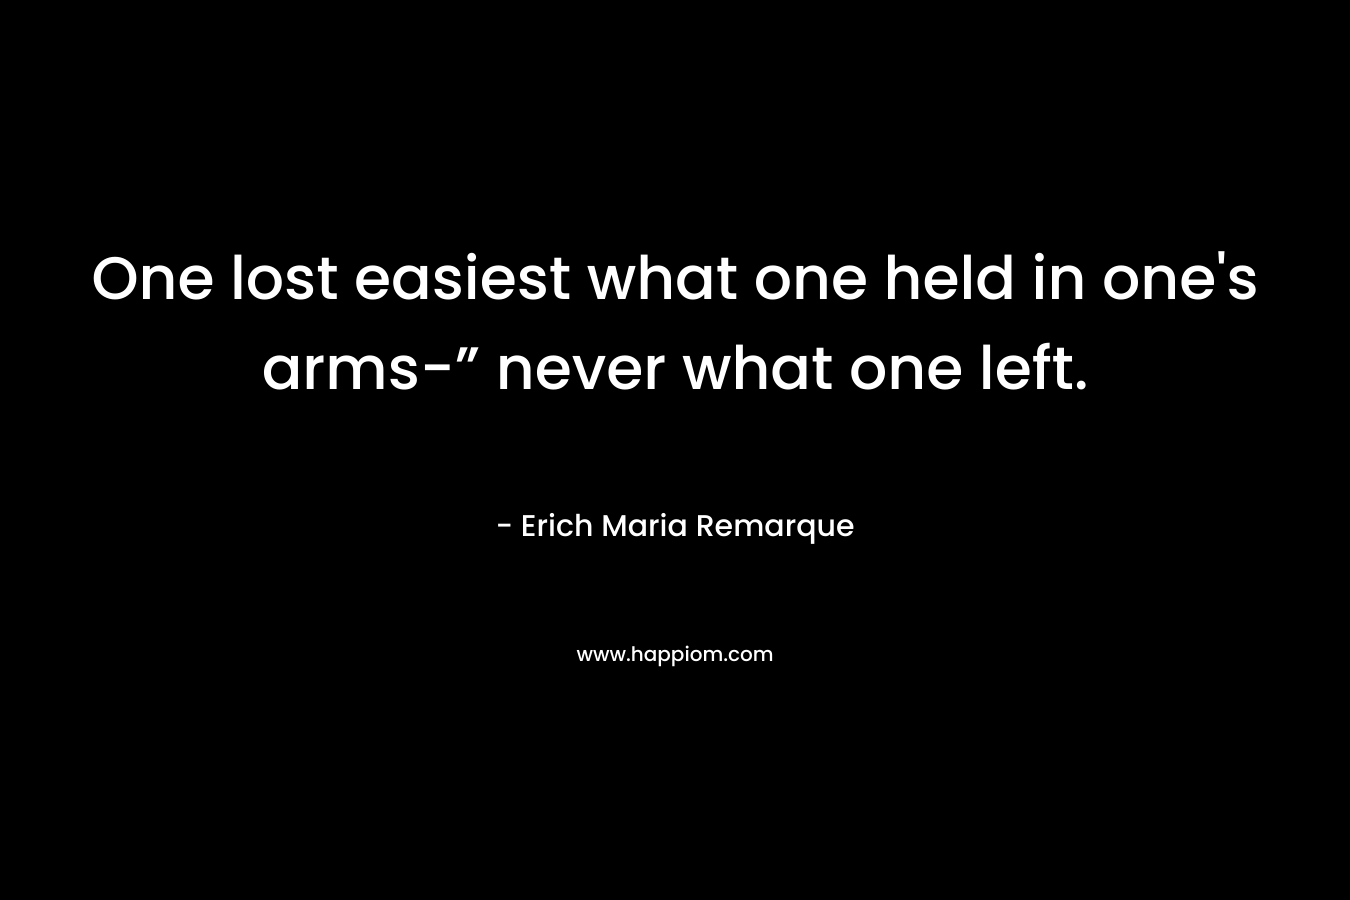 One lost easiest what one held in one's arms-” never what one left.